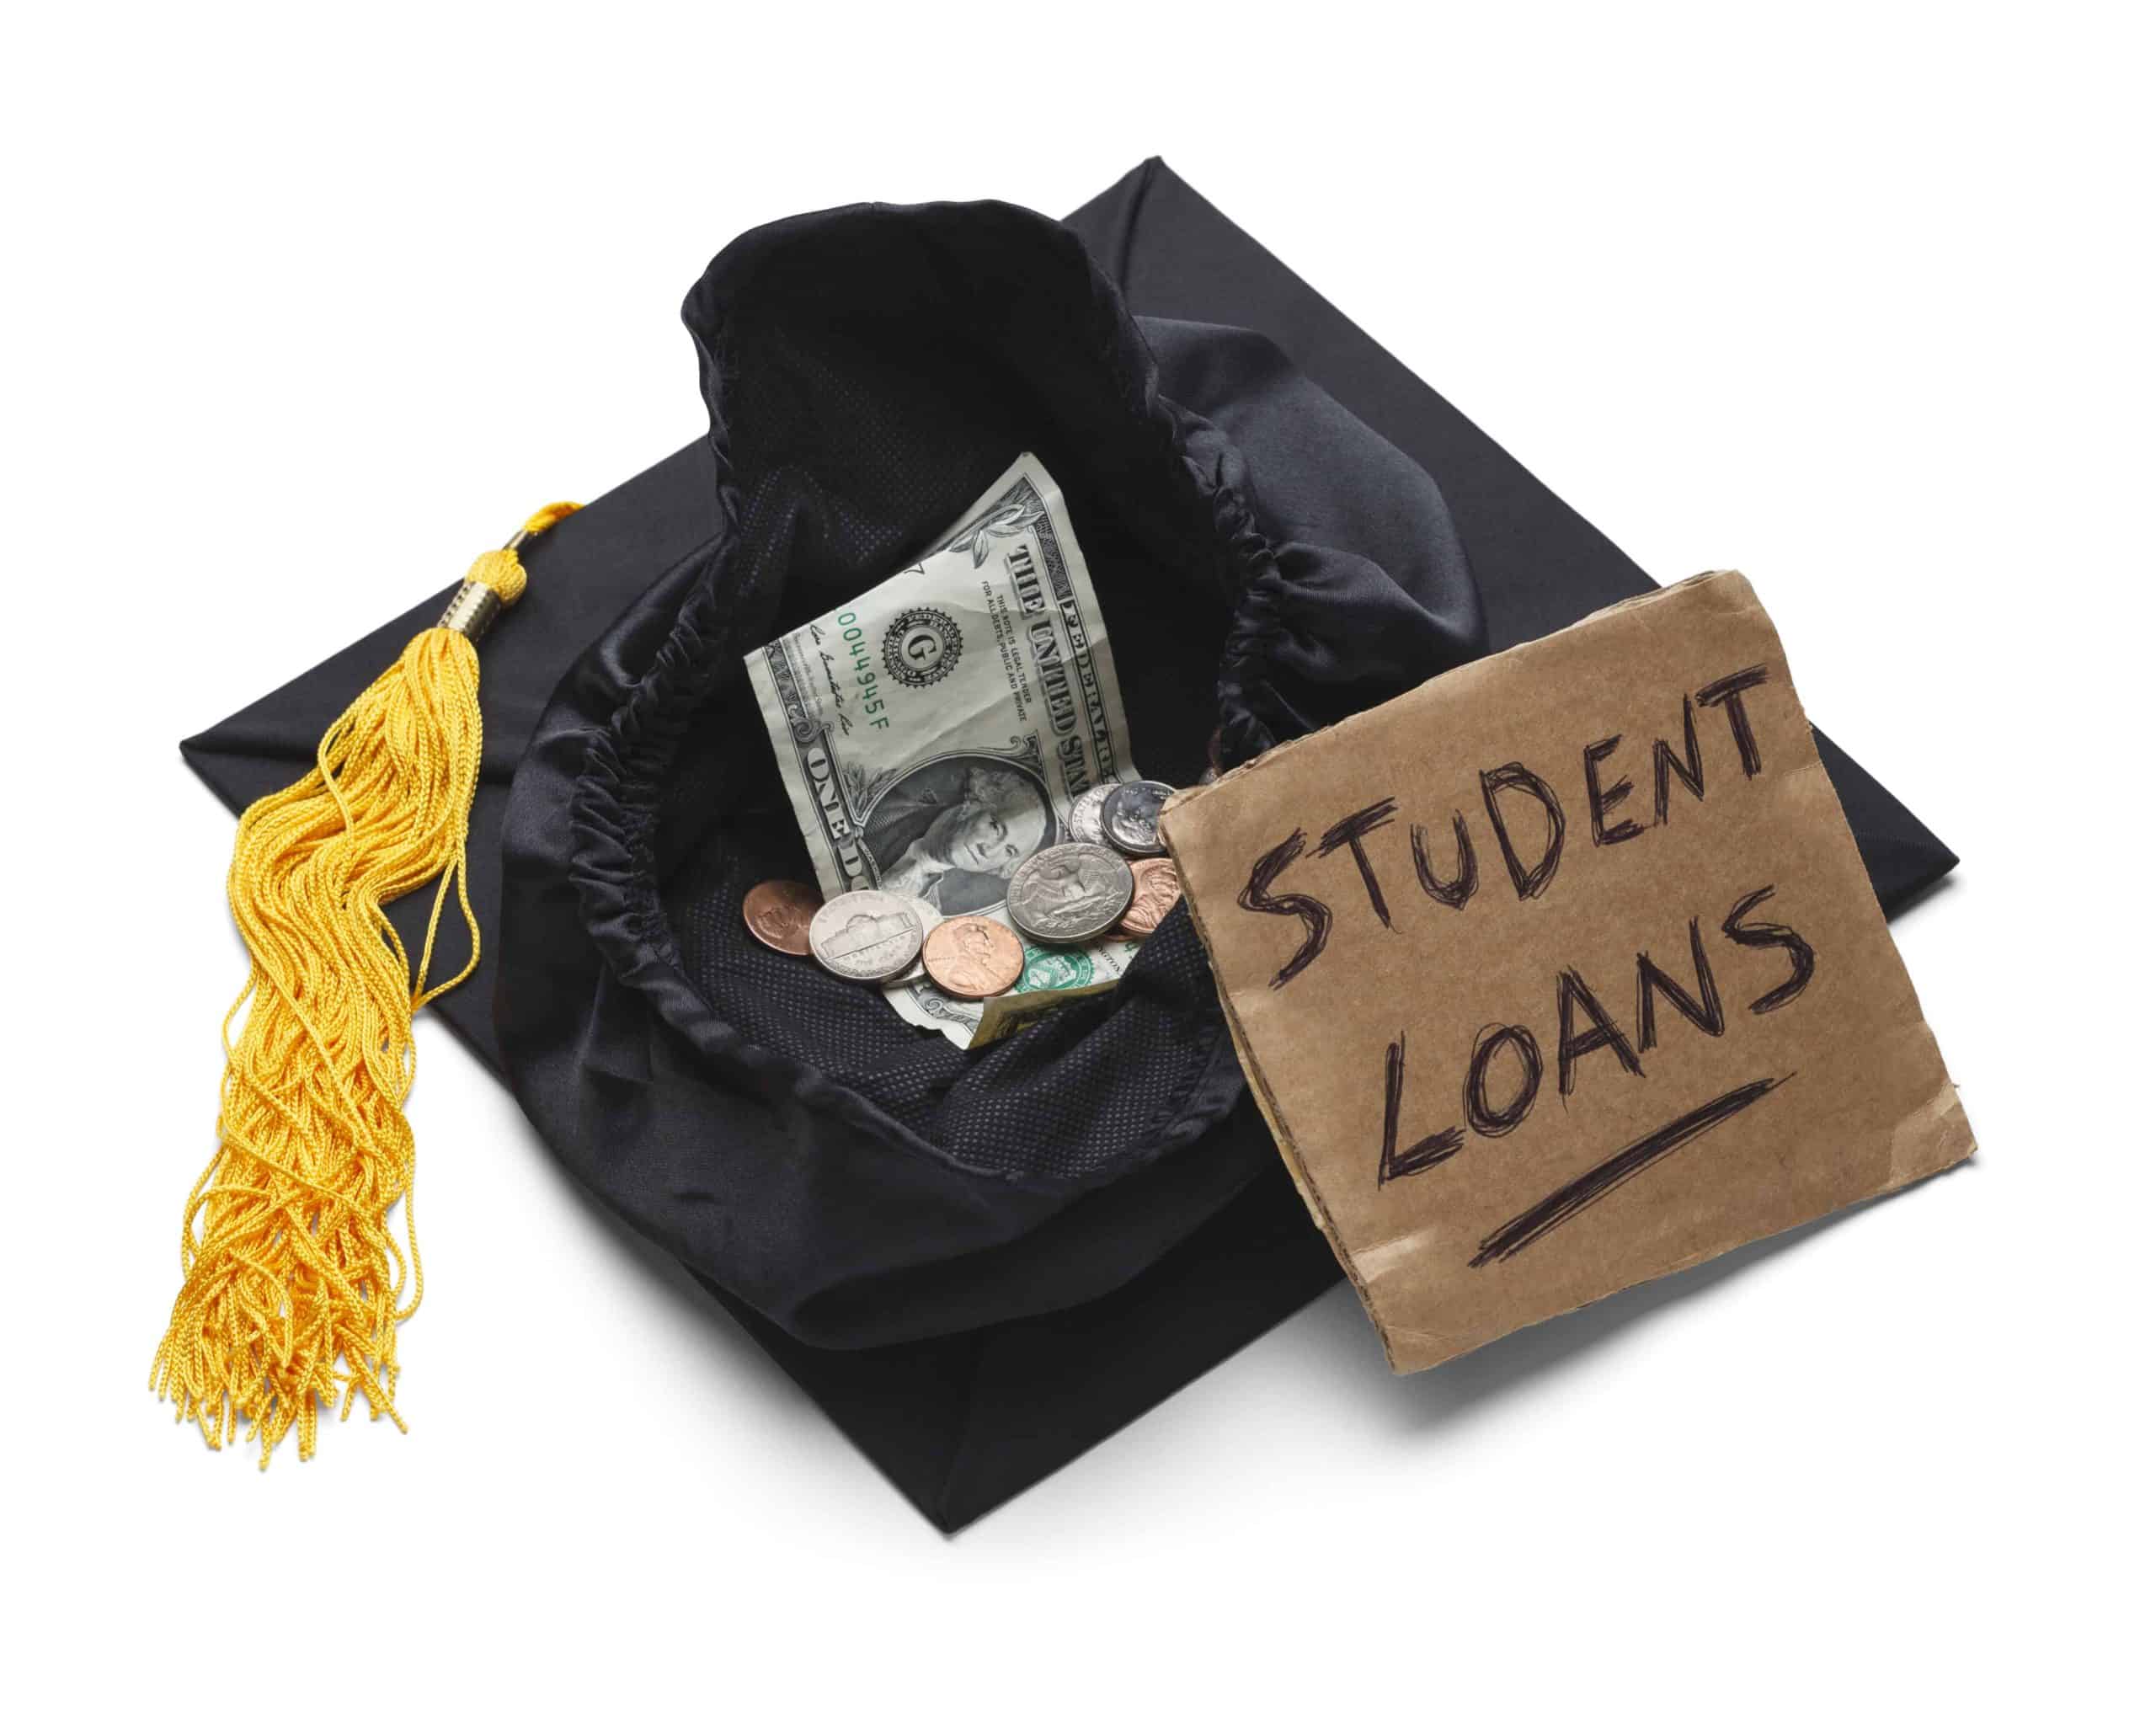 Refinancing your student loans is a great way to relieve some of the financial burdens you may be facing. SoFi can save borrowers $30,069 over the life of the loan. By locking in a lower interest rate on your student loans, you could save tens of thousands of dollars and pay your student loans off faster!